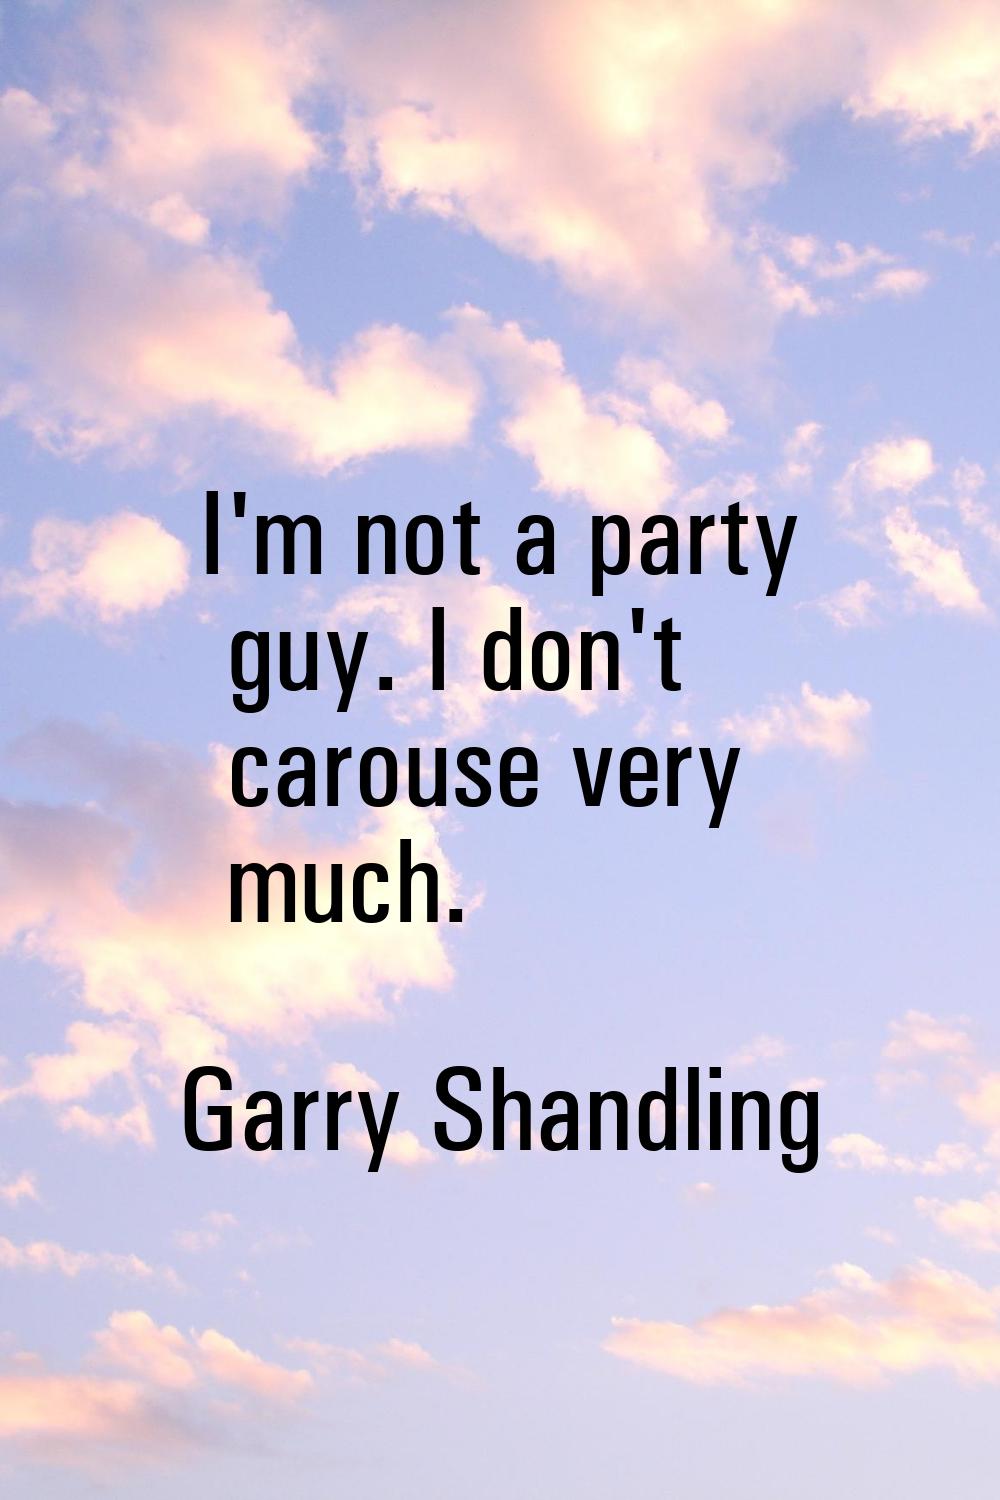 I'm not a party guy. I don't carouse very much.